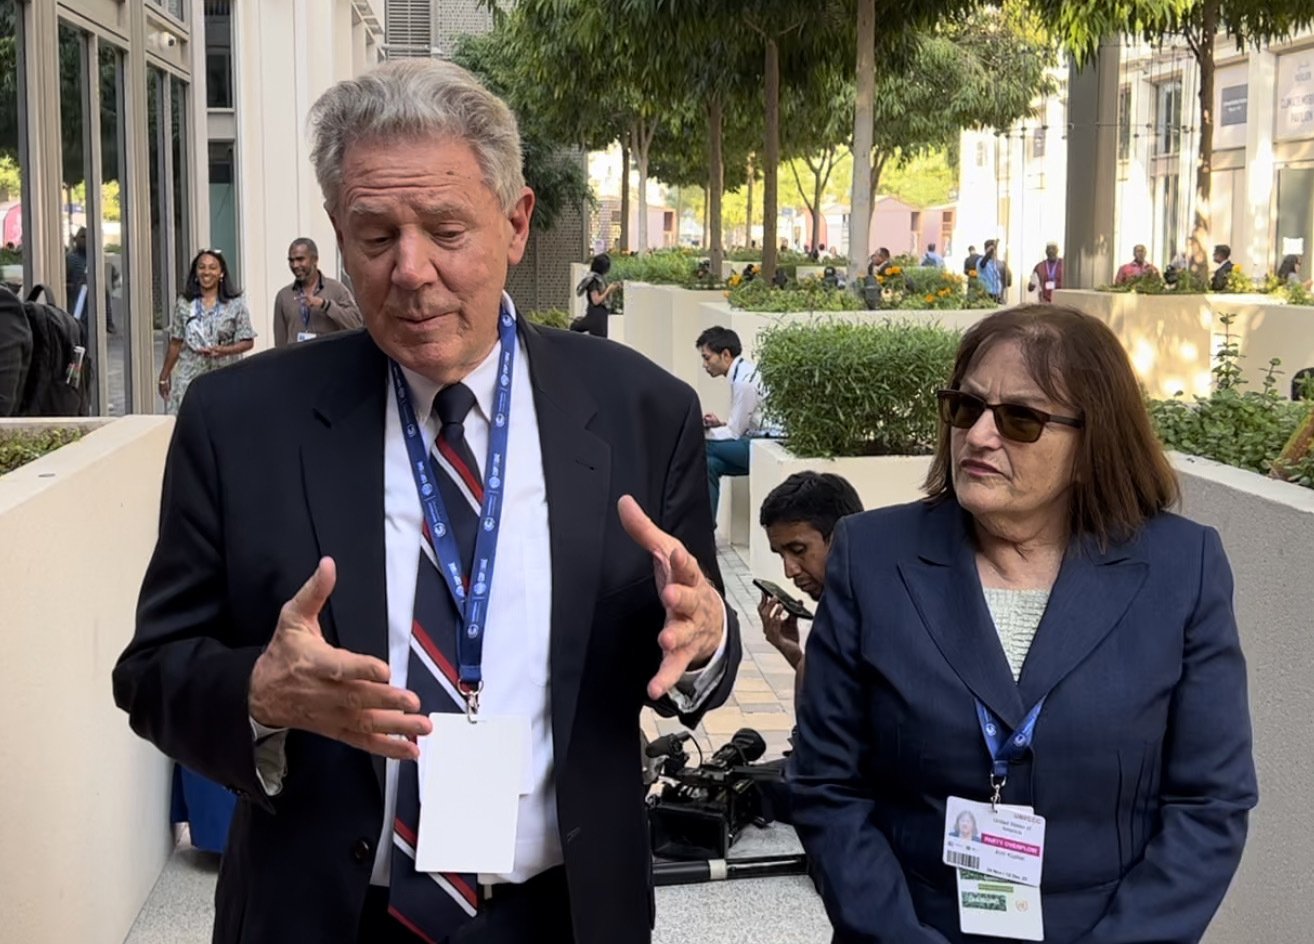 U.S. Rep. Frank Pallone Jr. of New Jersey, the ranking Democrat on the House Energy and Commerce Committee, and U.S. Rep. Ann Kuster of New Hampshire, a Democratic member of the committee, outside the U.S. Climate Center at COP28 in Dubai on Saturday. Credit: Bob Berwyn/Inside Climate News